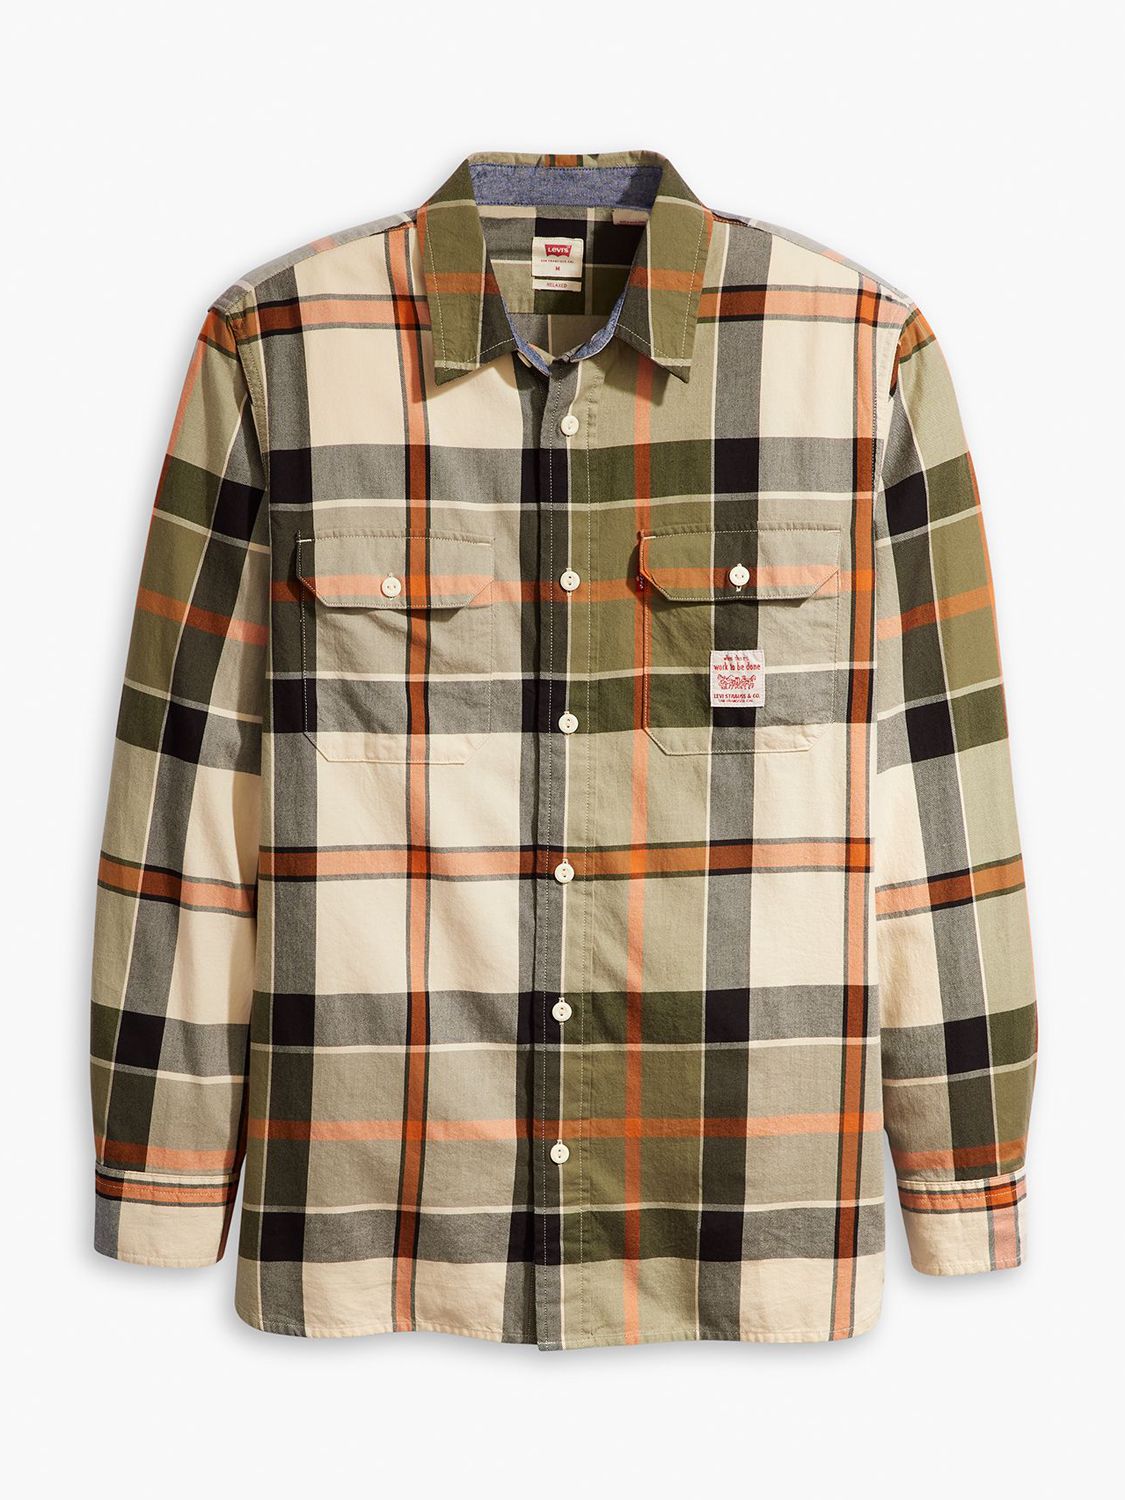 Buy Levi's Classic Relaxed Fit Worker Shirt, Multi Online at johnlewis.com